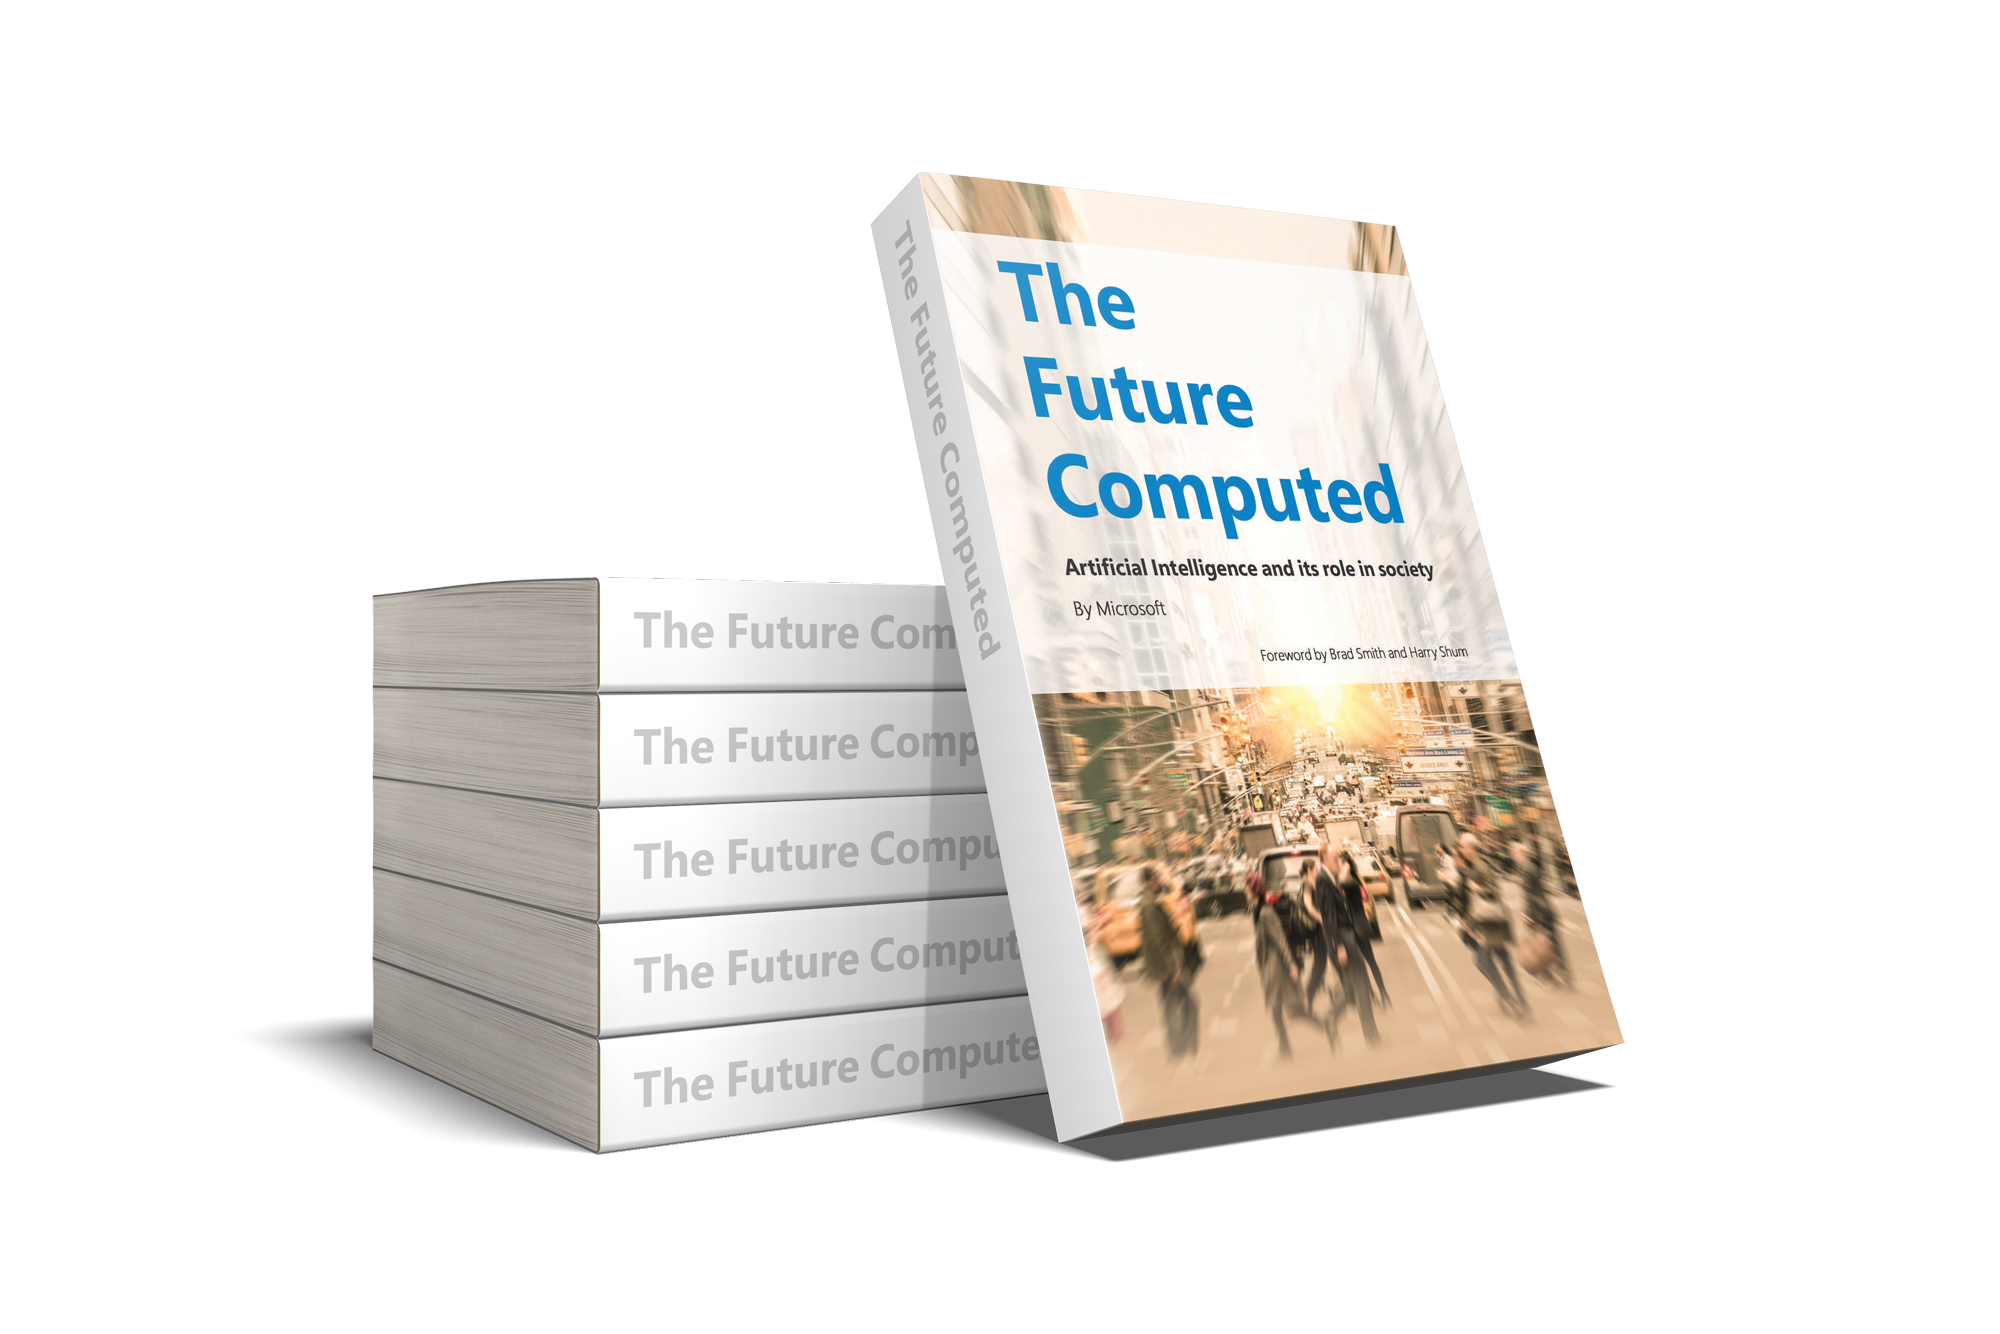 Photo of a stack of books entitled "The Future Computed"